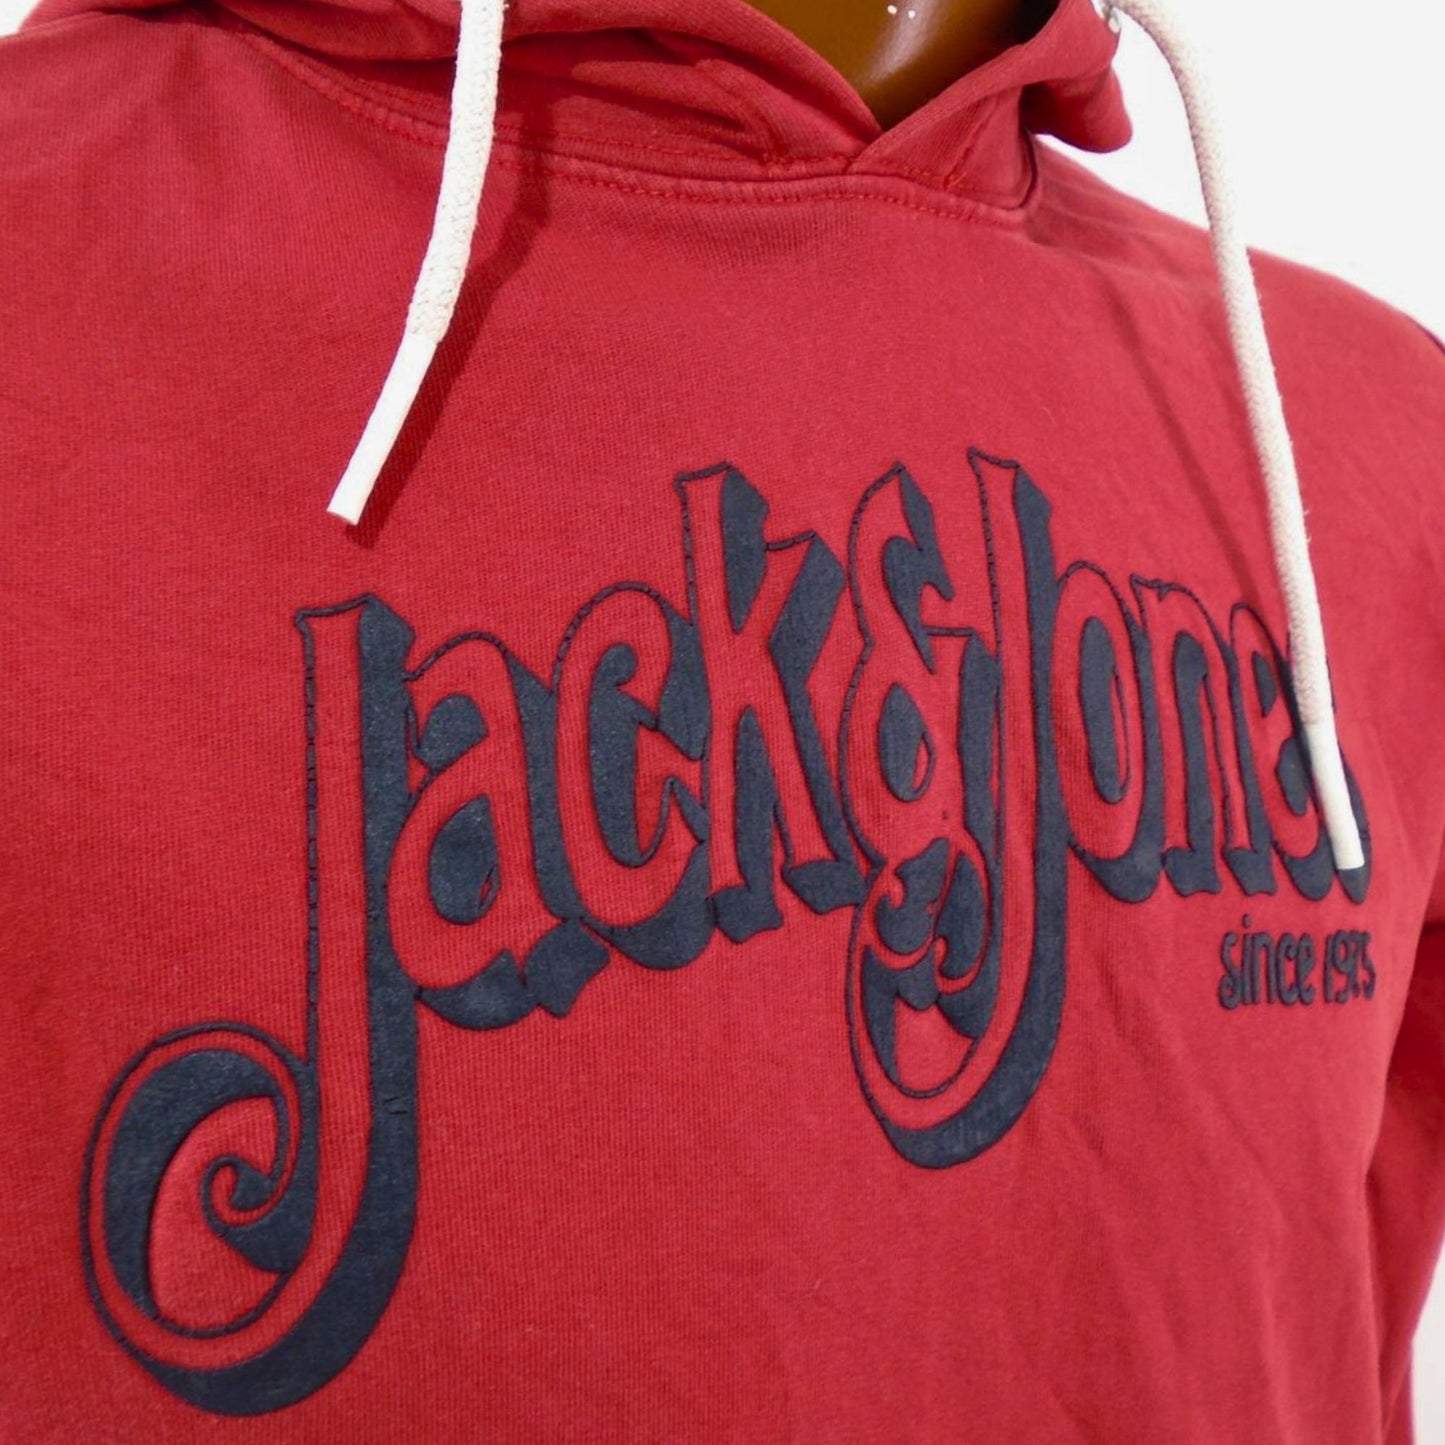 Eye-Catching Men's Jack & Jones Hoodie in Red, Size L - Used, Good Condition